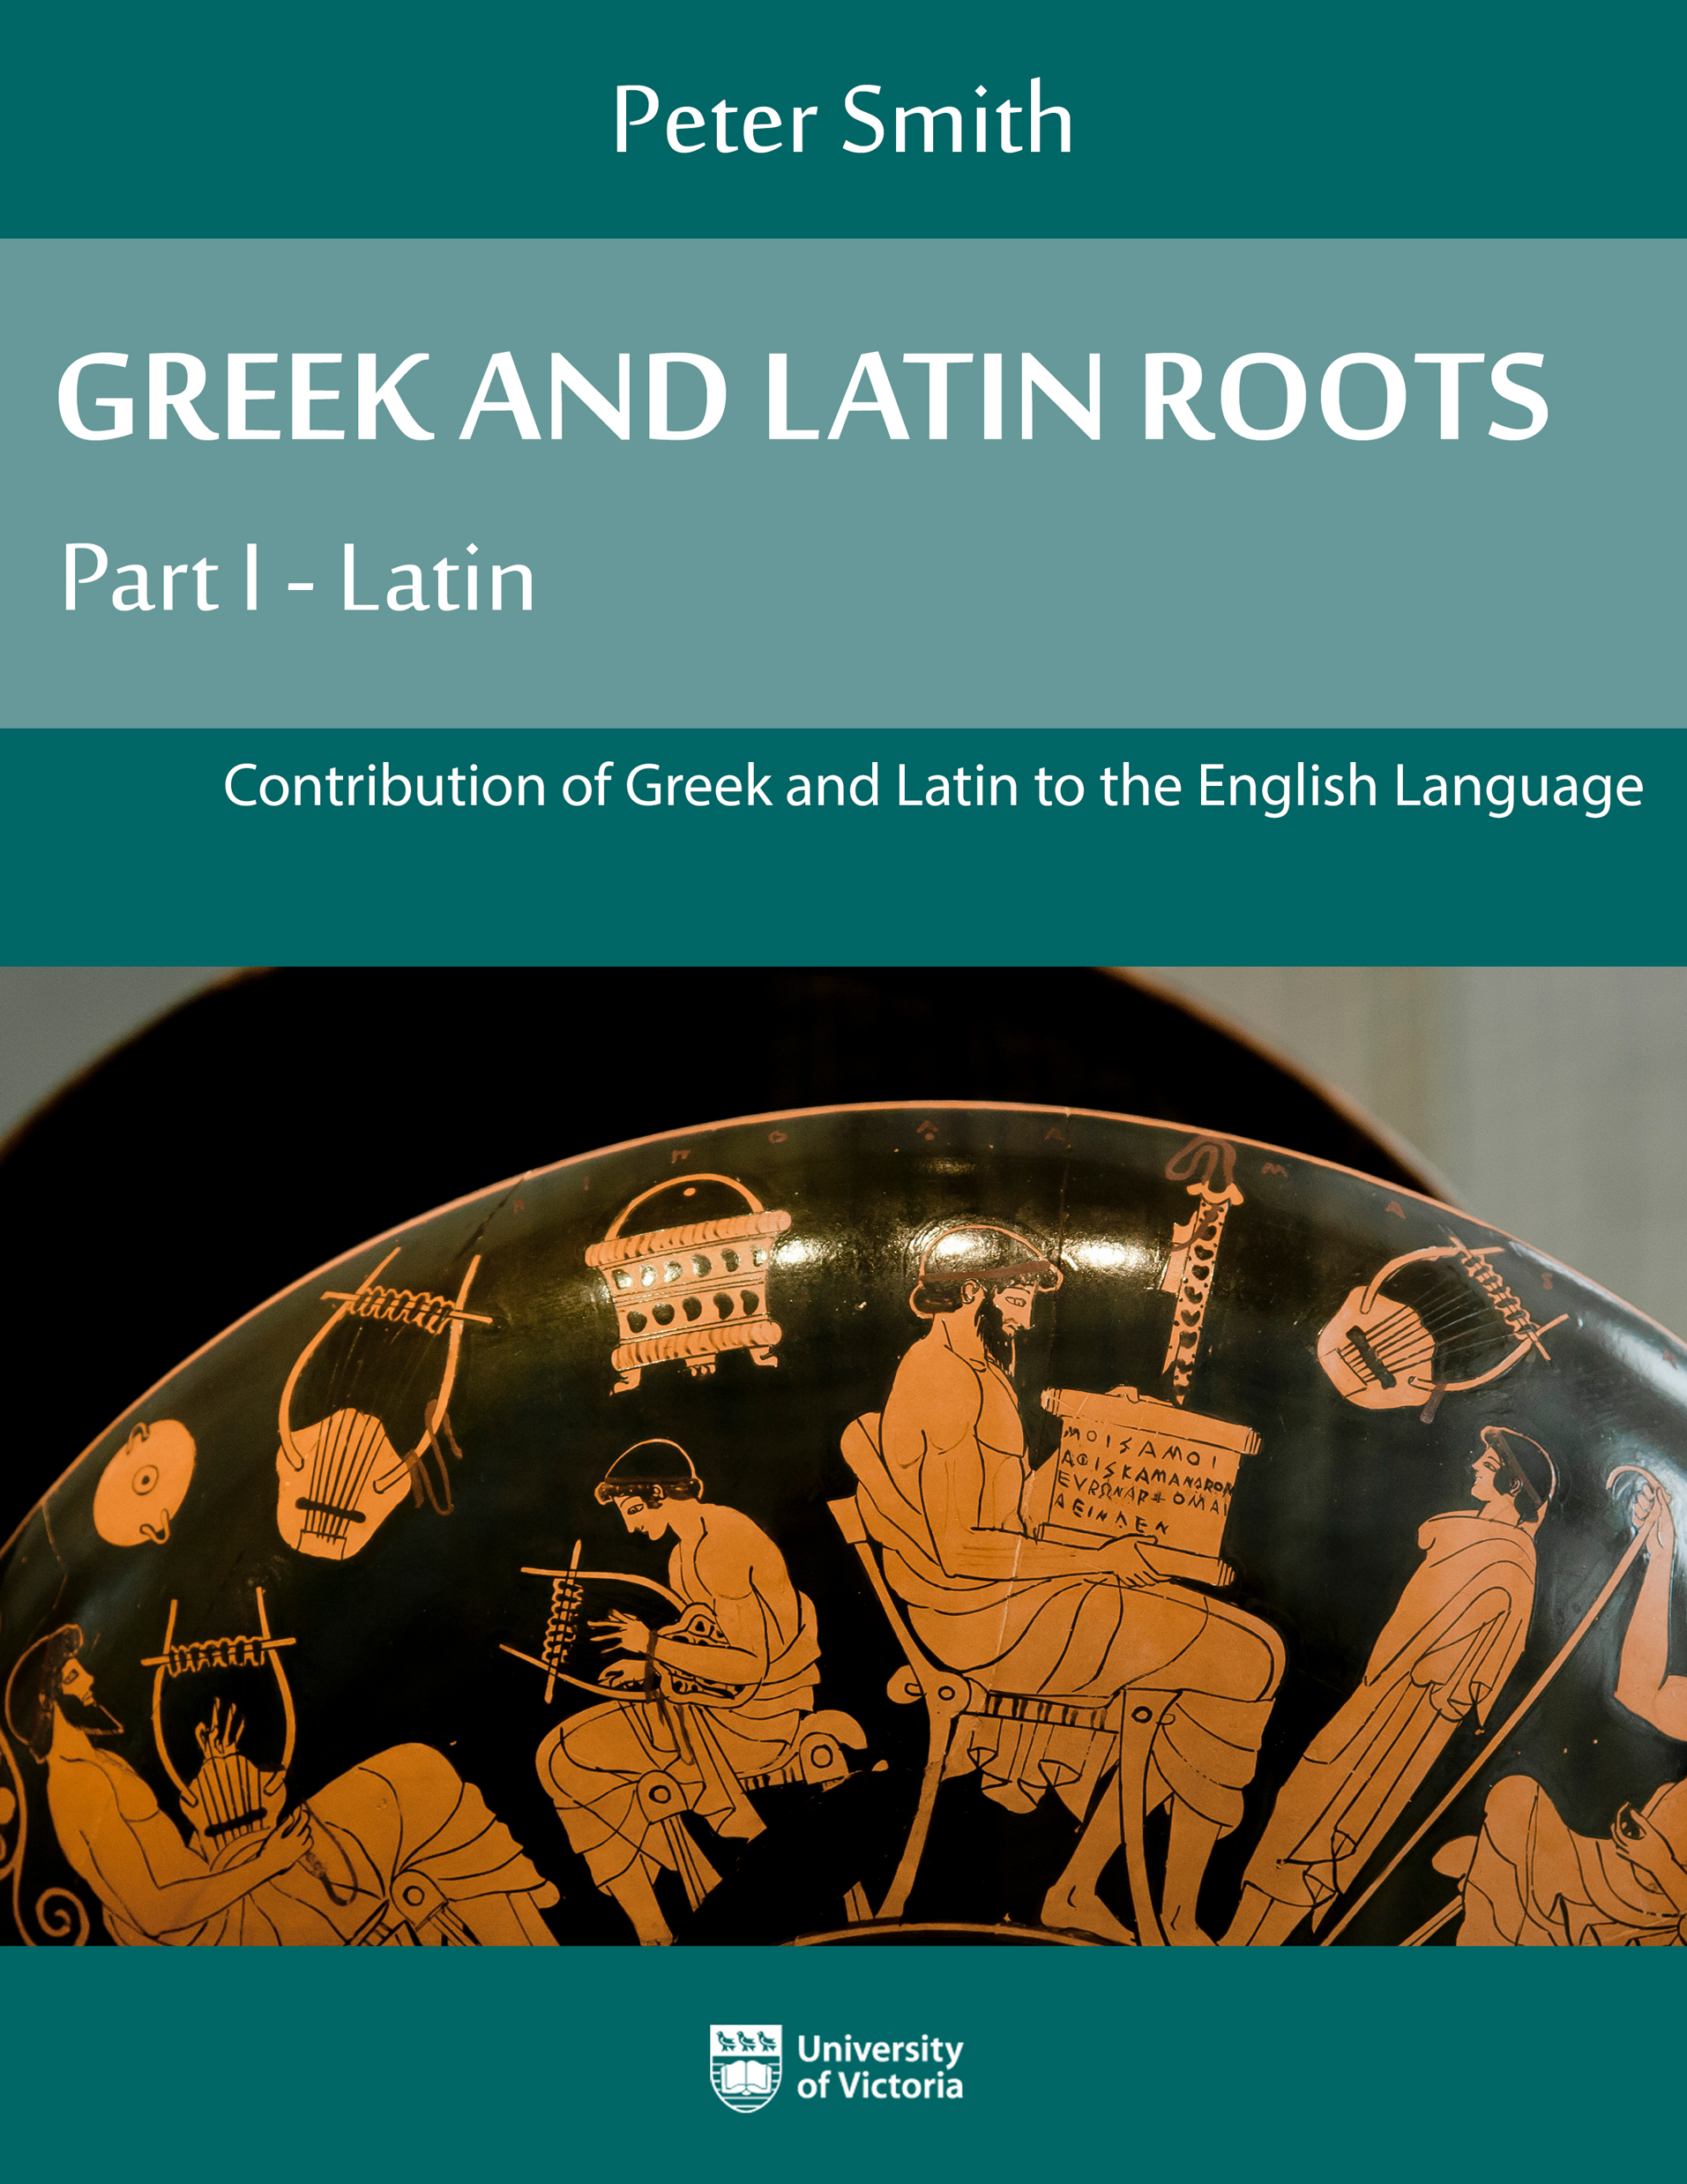 Read more about Greek and Latin Roots: Part I - Latin